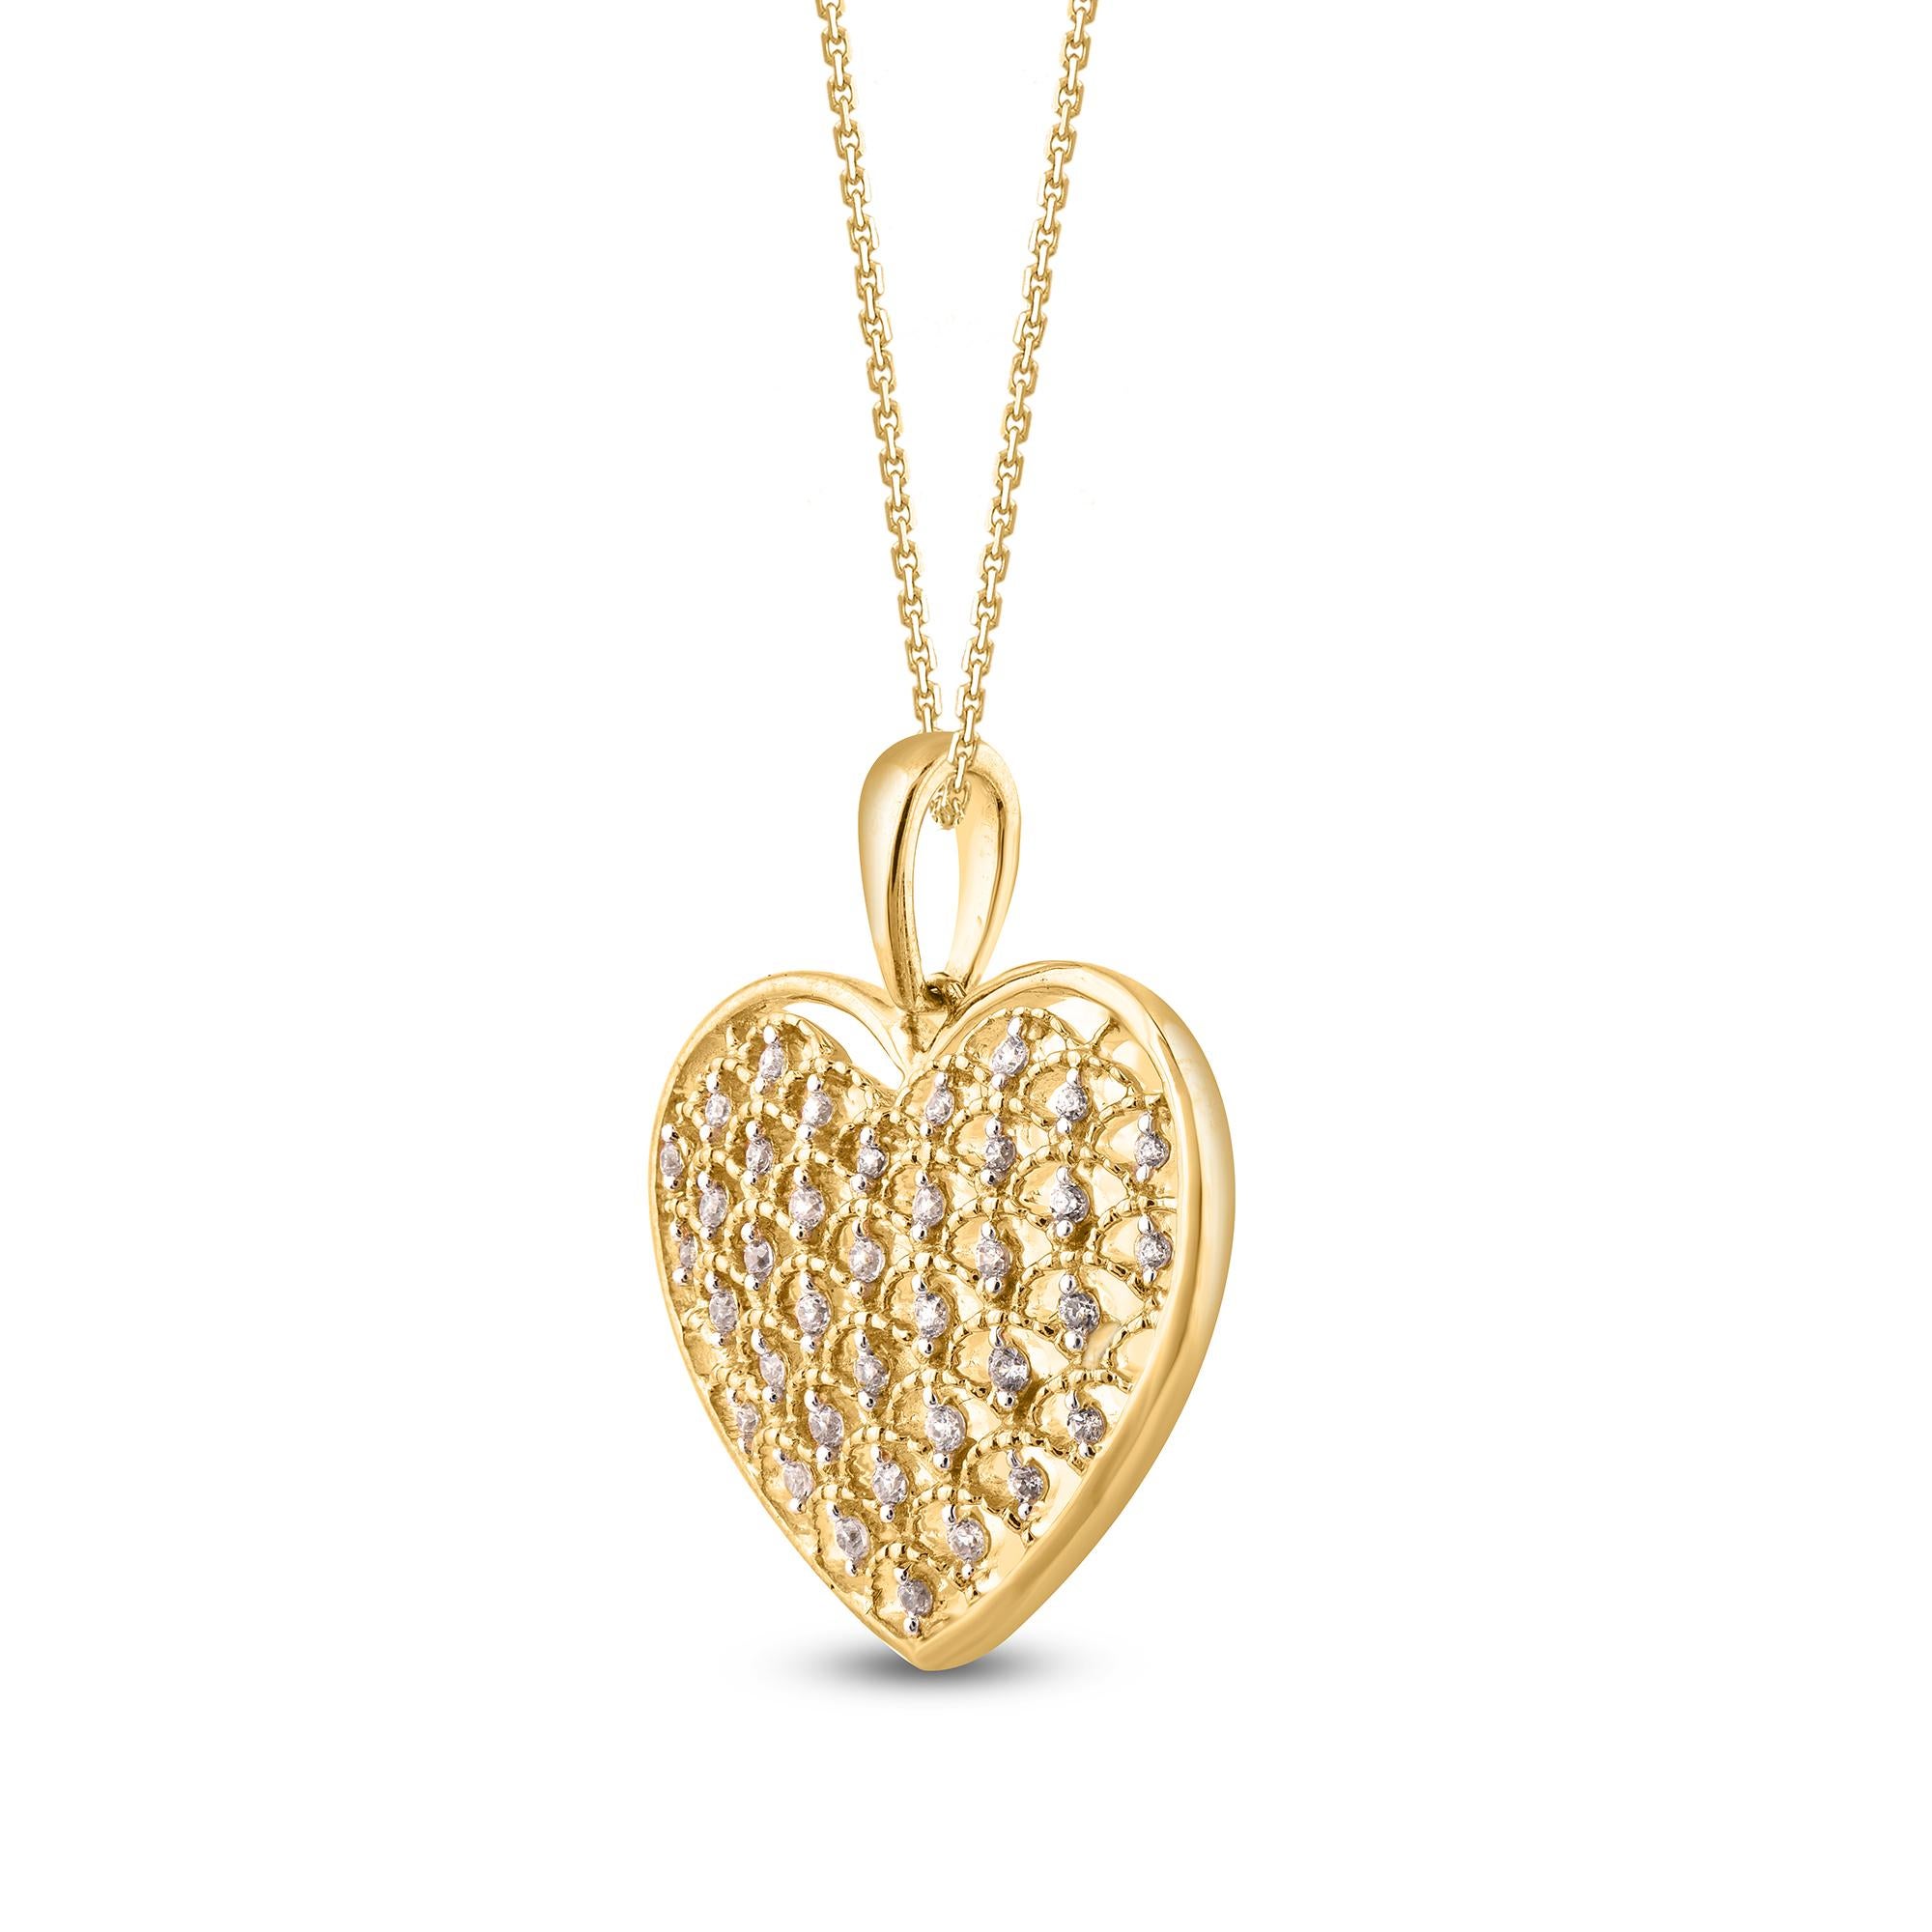 Make any day special with this gorgeous diamond heart pendant. This heart pendant is crafted from 14-karat yellow gold and features 37 single cut diamonds set in prong setting. H-I color I2 clarity and a high polish finish complete the Brilliant